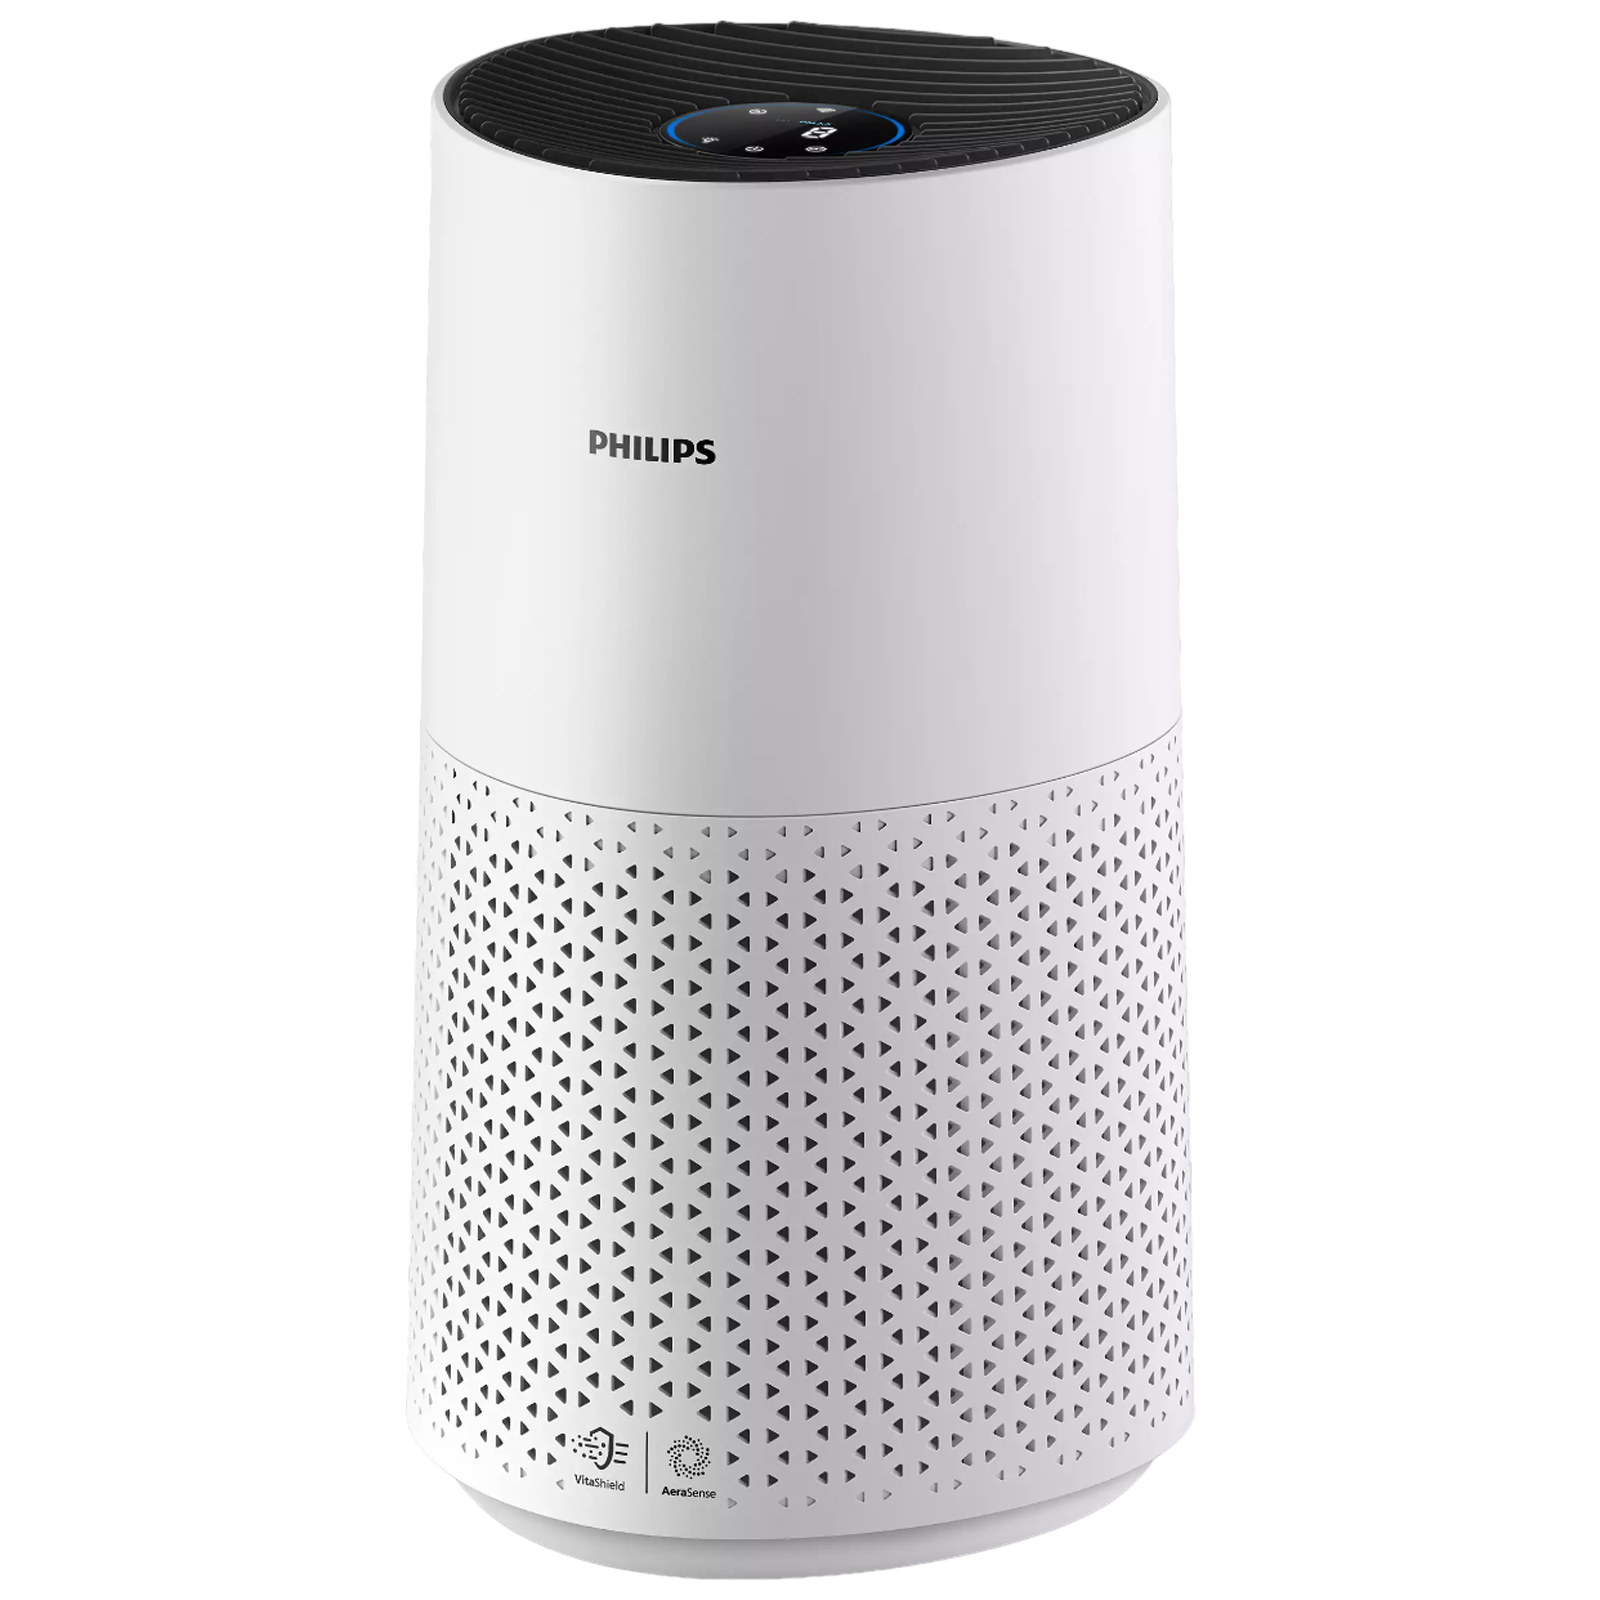 PHILIPS 1000i Series NanoProtect HEPA and VitaShield Technology Smart Air Purifier (Activated Carbon Filter, AC1715/60, White)